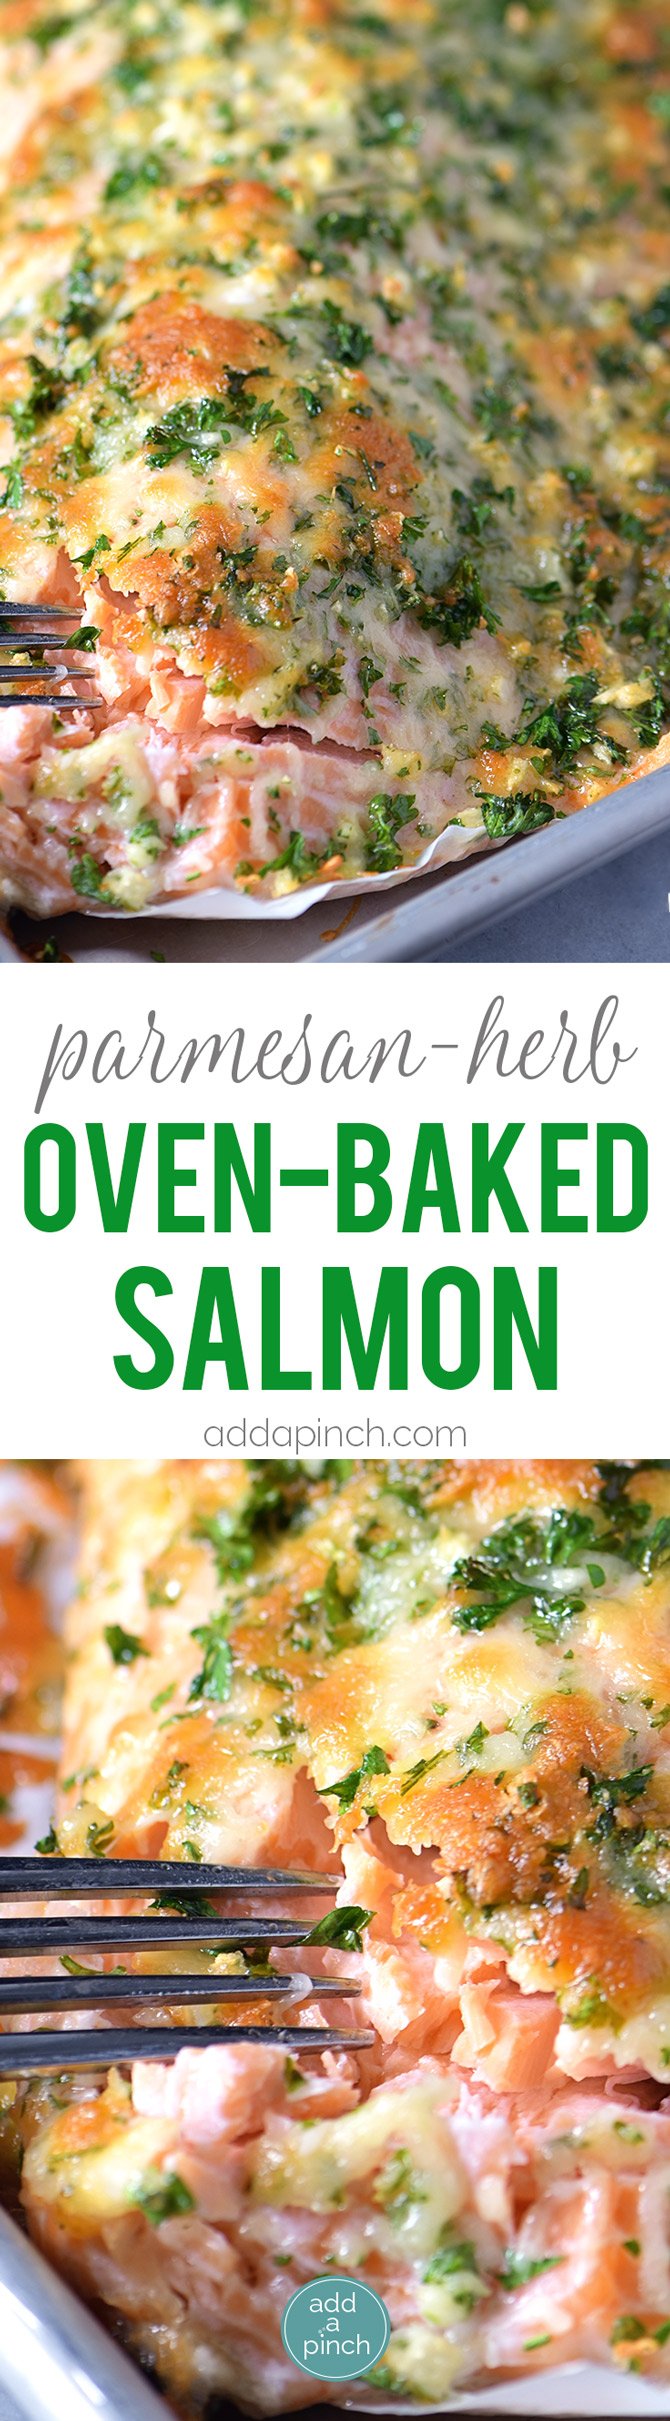 Baked Salmon Recipe - Baked salmon makes a weeknight meal that is easy enough for the busiest of nights while being elegant enough for entertaining. This oven baked salmon with a Parmesan herb crust is out of this world delicious! // addapinch.com